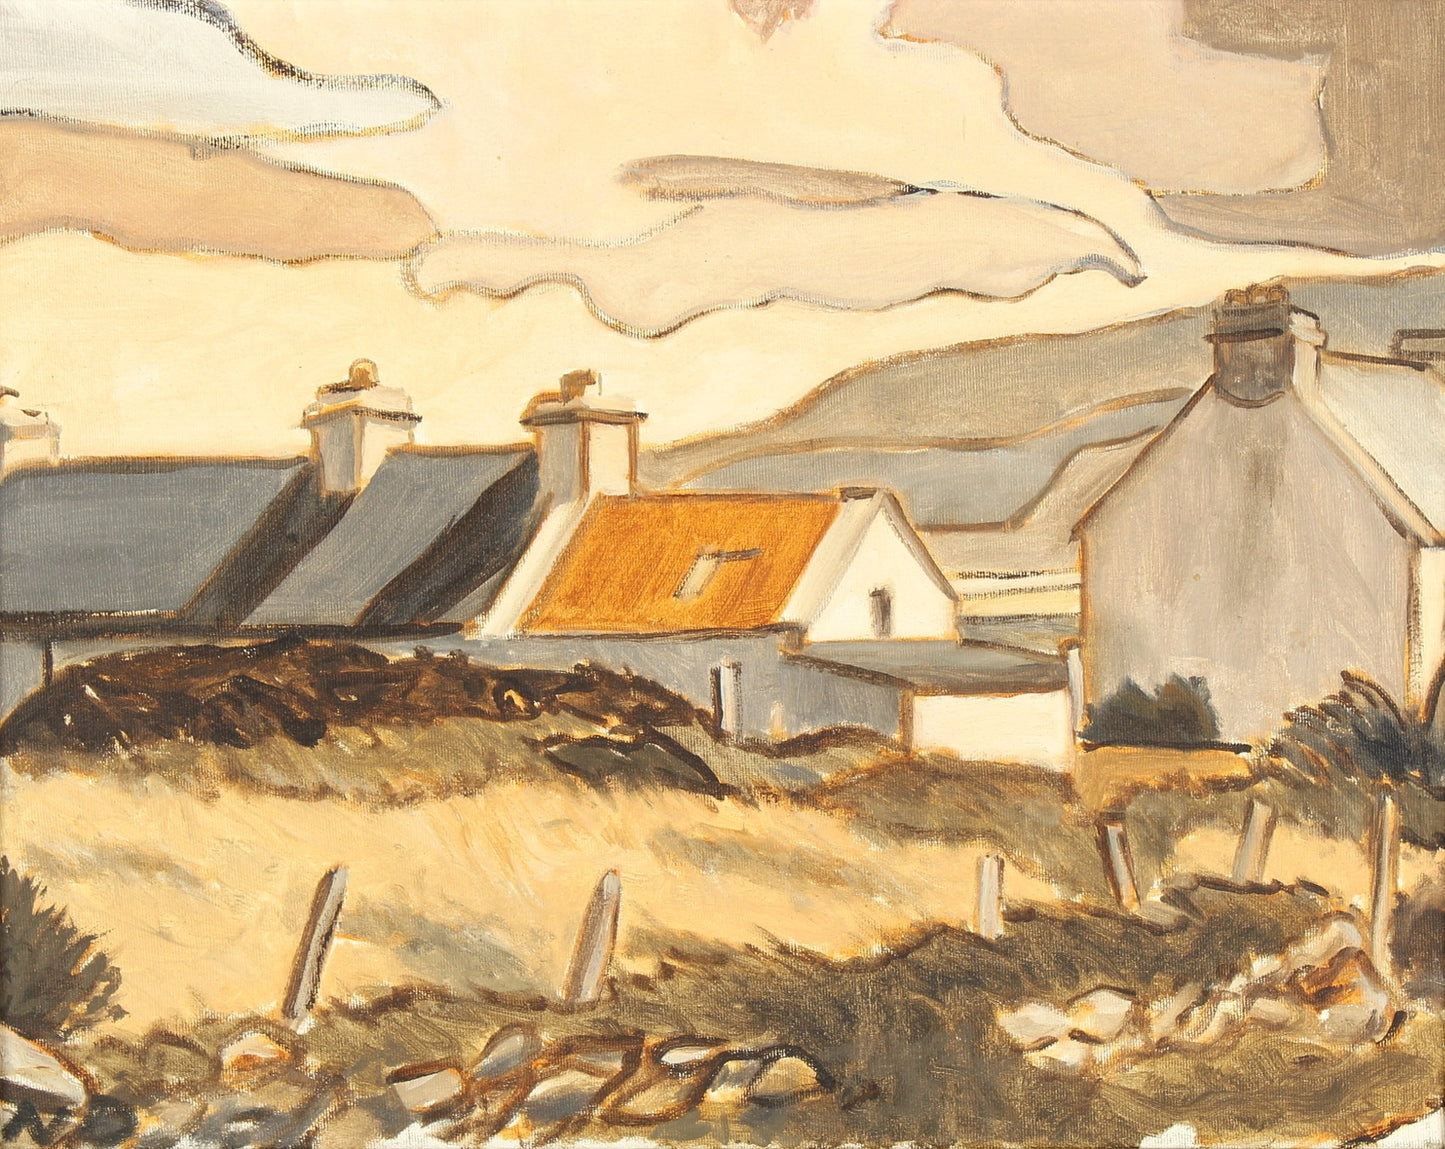 "TURF STACK AND HOUSES AT BALLYCROY, LOOKING OVER BLACKSOD BAY, CO. MAYO, EIRE'